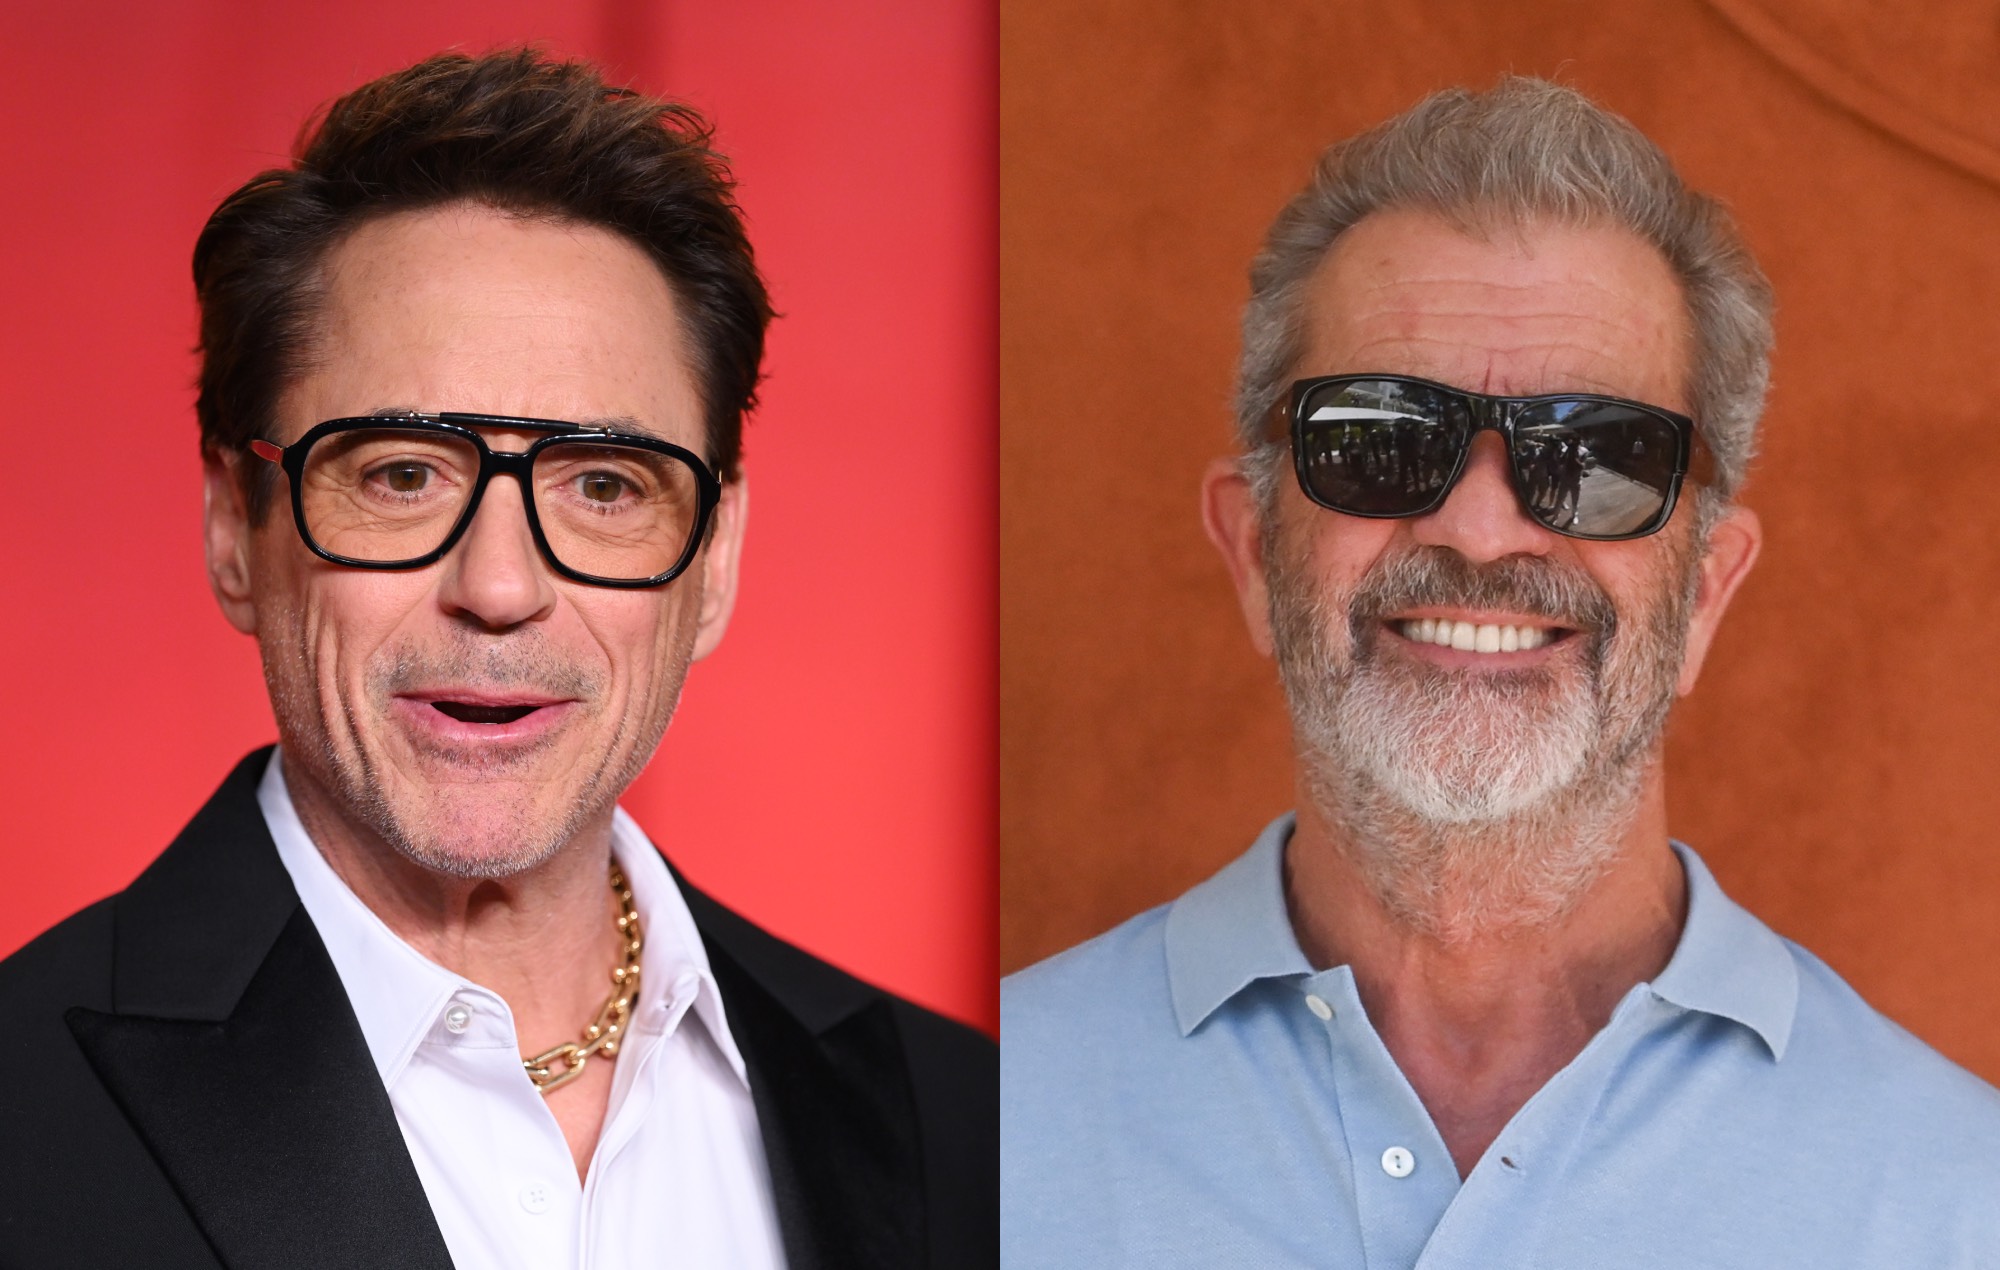 Mel Gibson thanks Robert Downey Jr. for support following anti-Semitism scandal